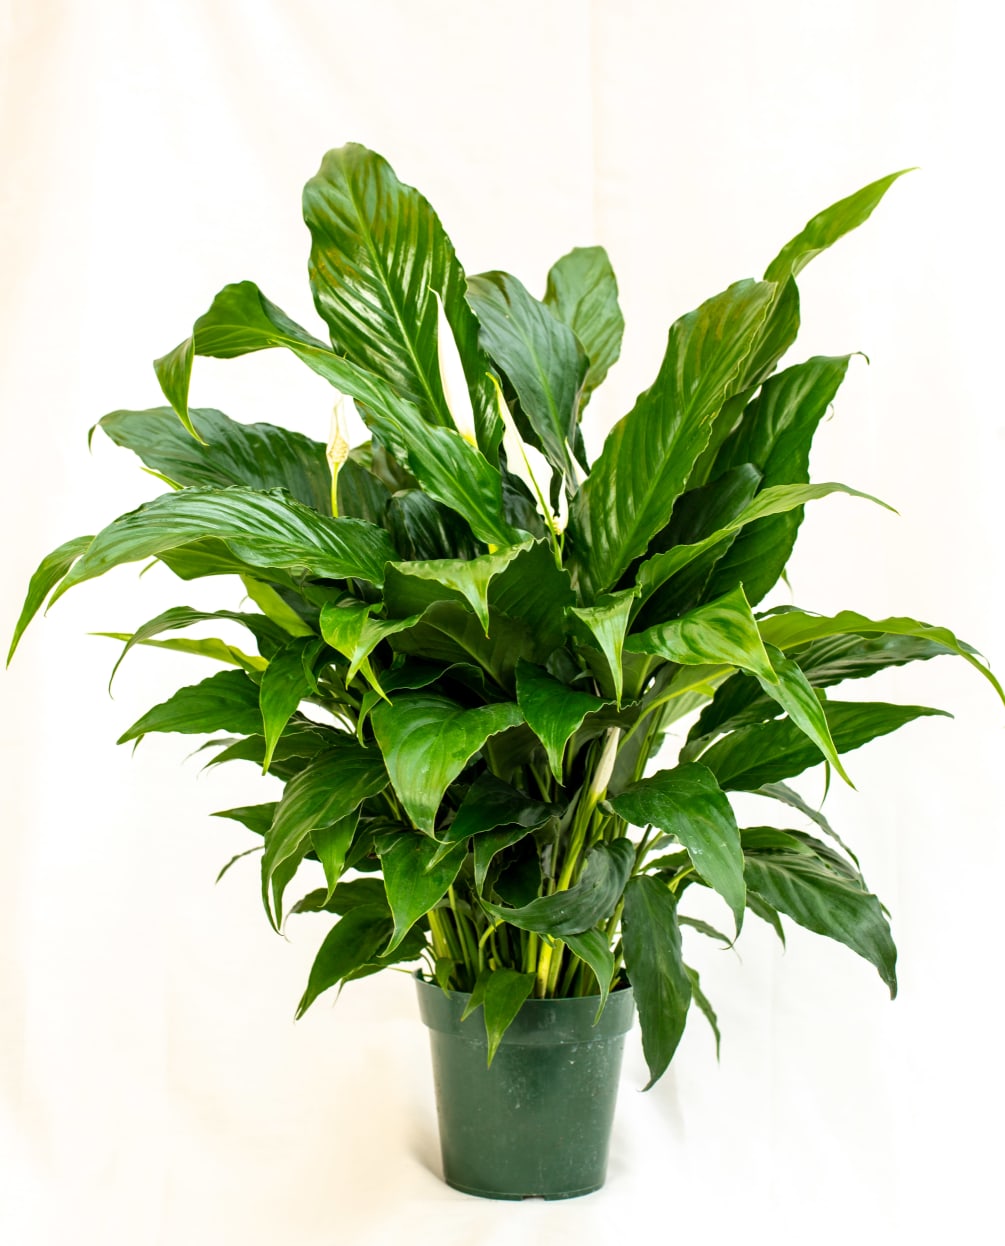 Common house plant, easy care, low light tolerant.  Commonly sent to